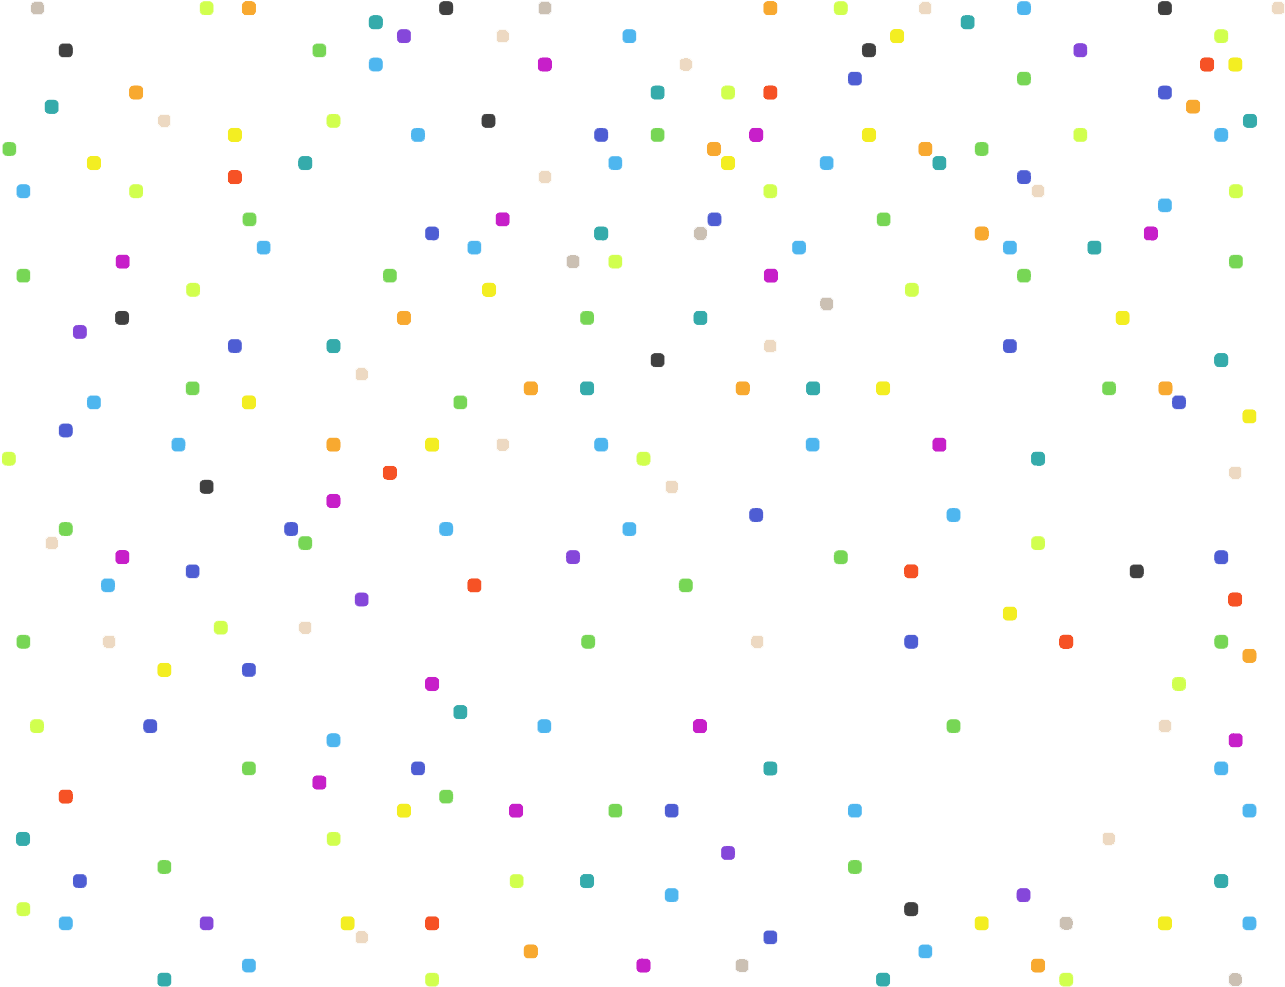 A Black Background With Many Colored Dots